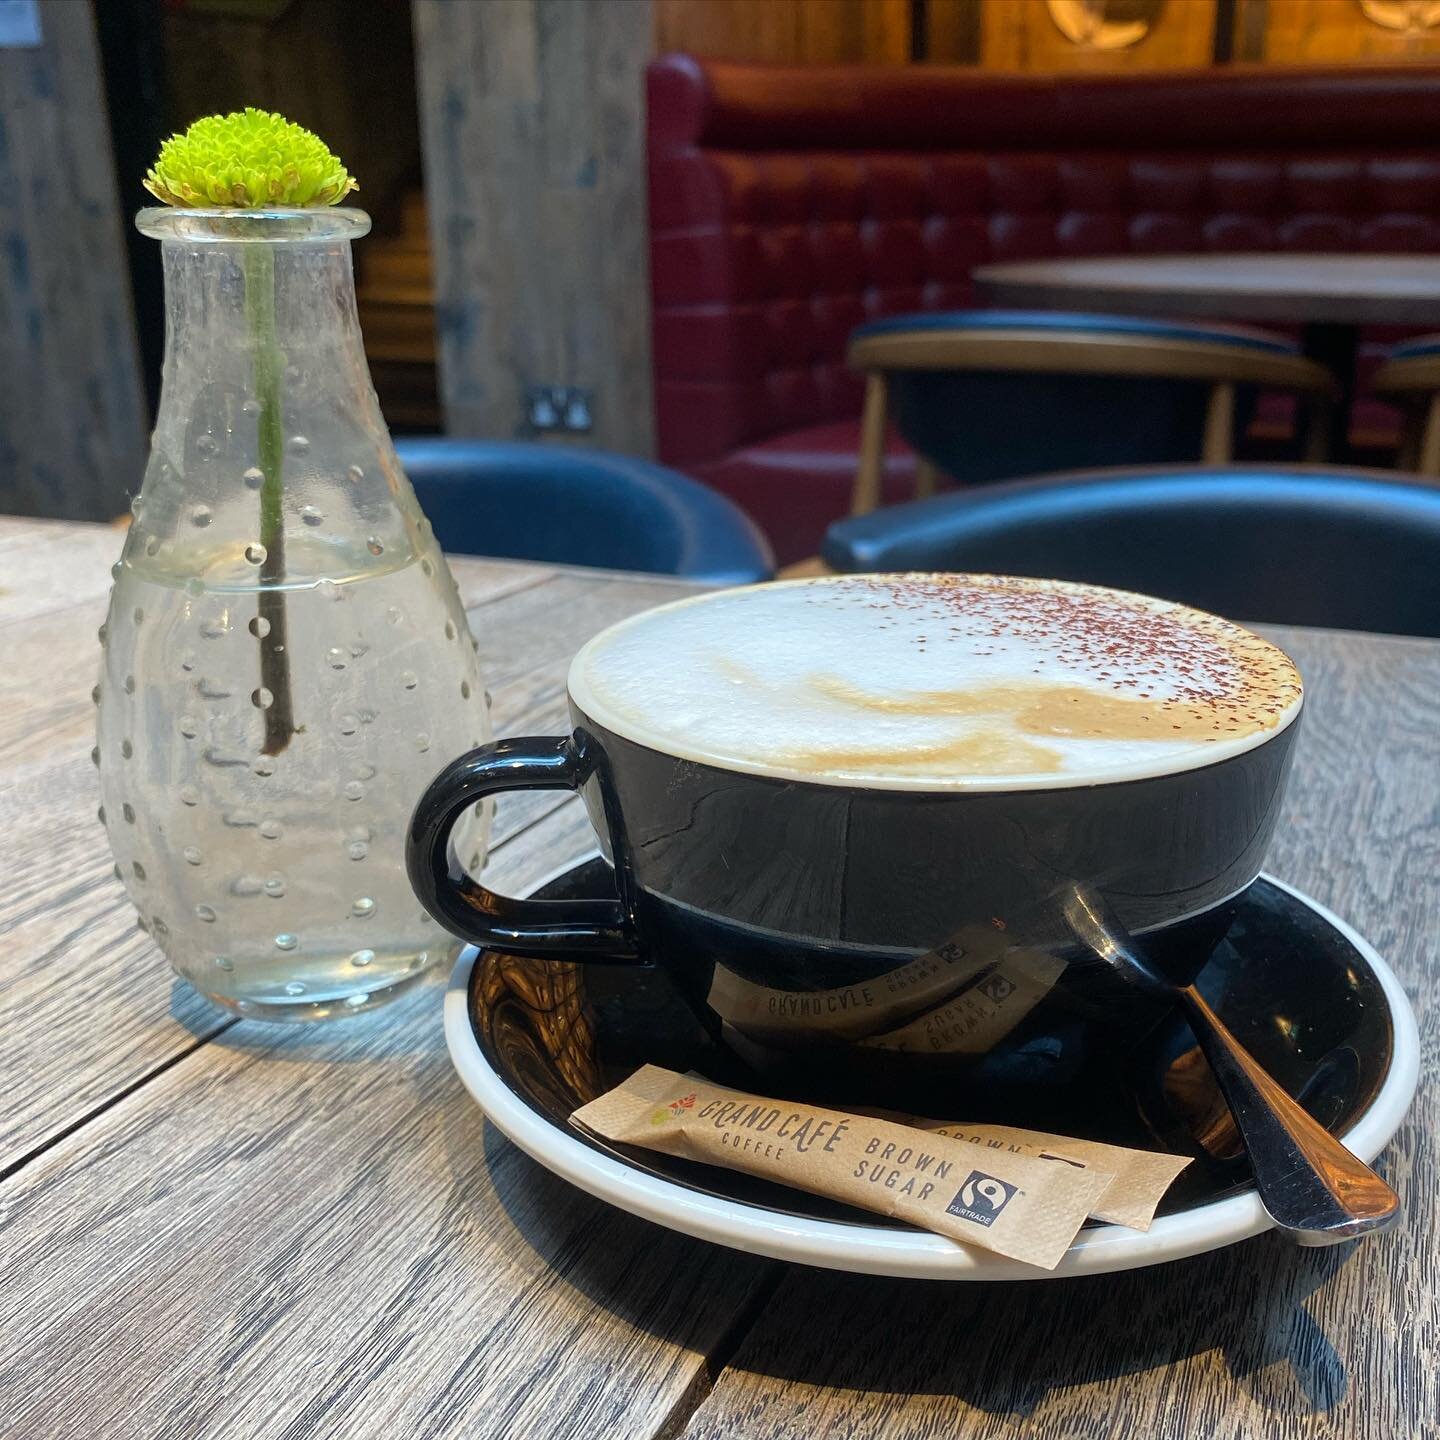 INTERNATIONAL COFFEE DAY☕️

Why not pop in for a coffee and a croissant, to start the day right?🥐

However from today we now open slightly later, from 9am!

#internationalcoffeeday #thebeechhouseamersham